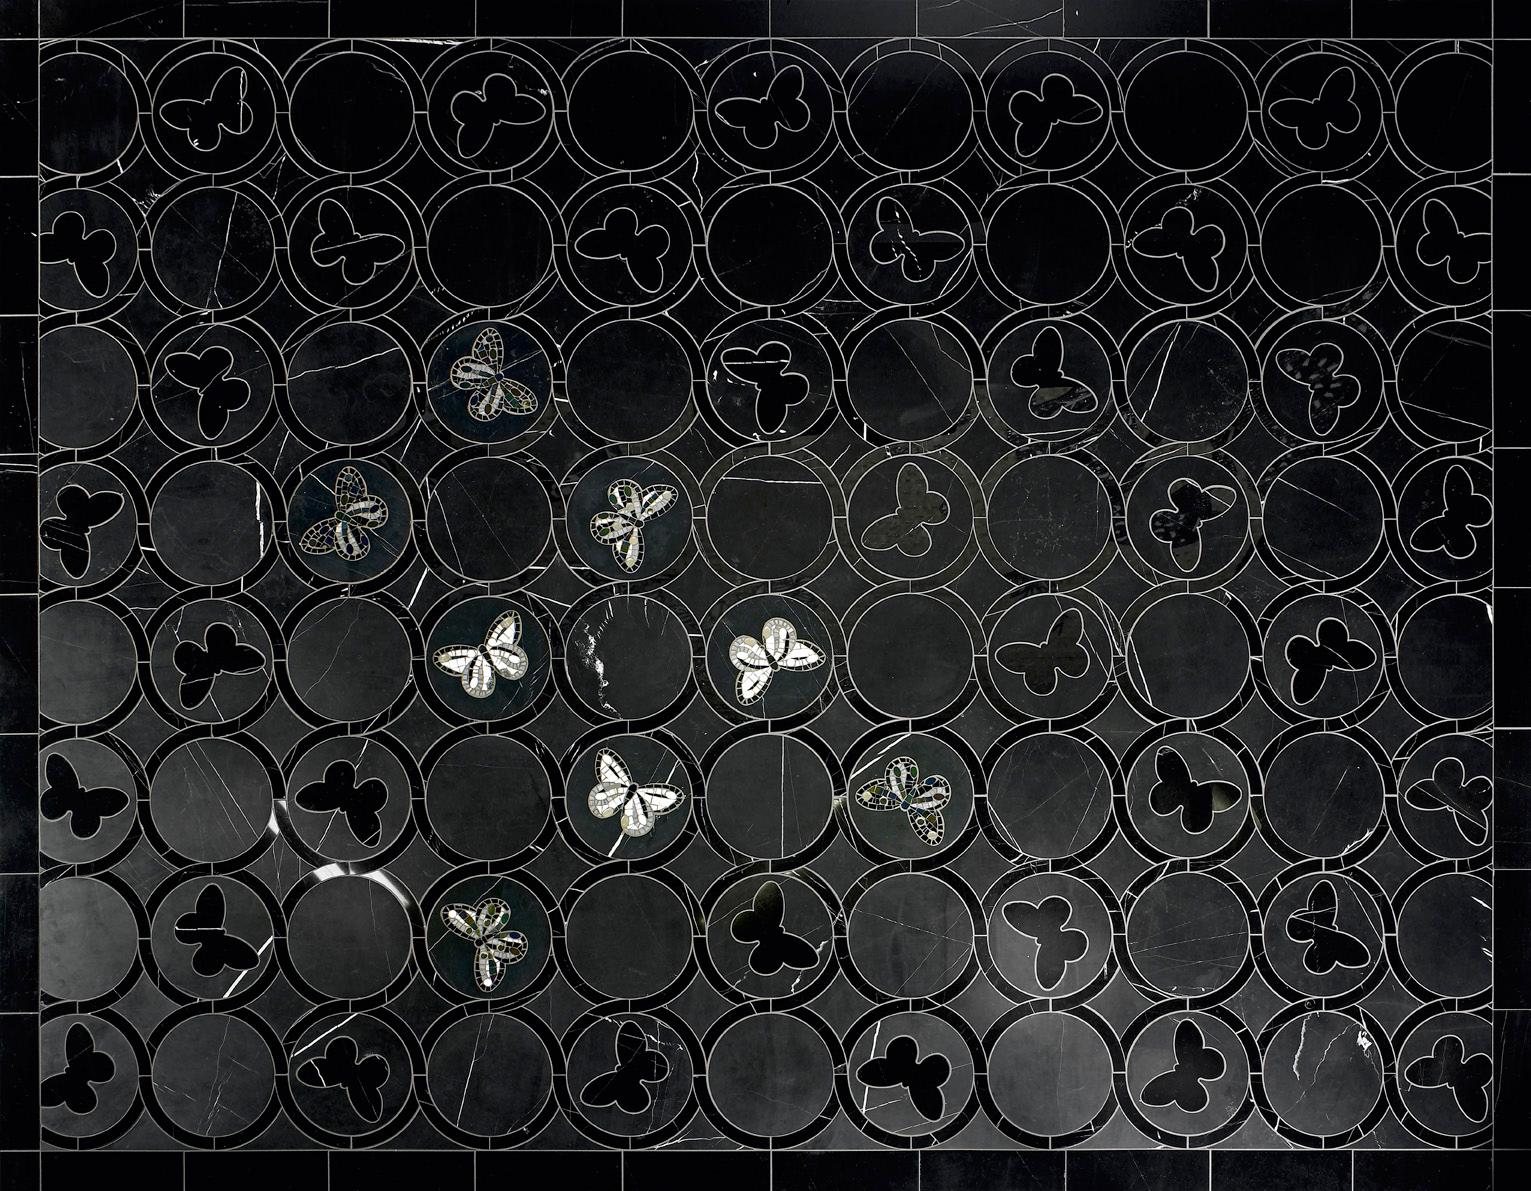 Waterjet Marble Patterns

Nocturnia Black
Black Marble, Black Acient Marble
Glass artistic mosaic inlay : Alma, black iridescent, white murano
Price for square meter : € 2.350

Nocturnia BE
Honey Onyx, Crema, Noce
artistic glass mosaic : White